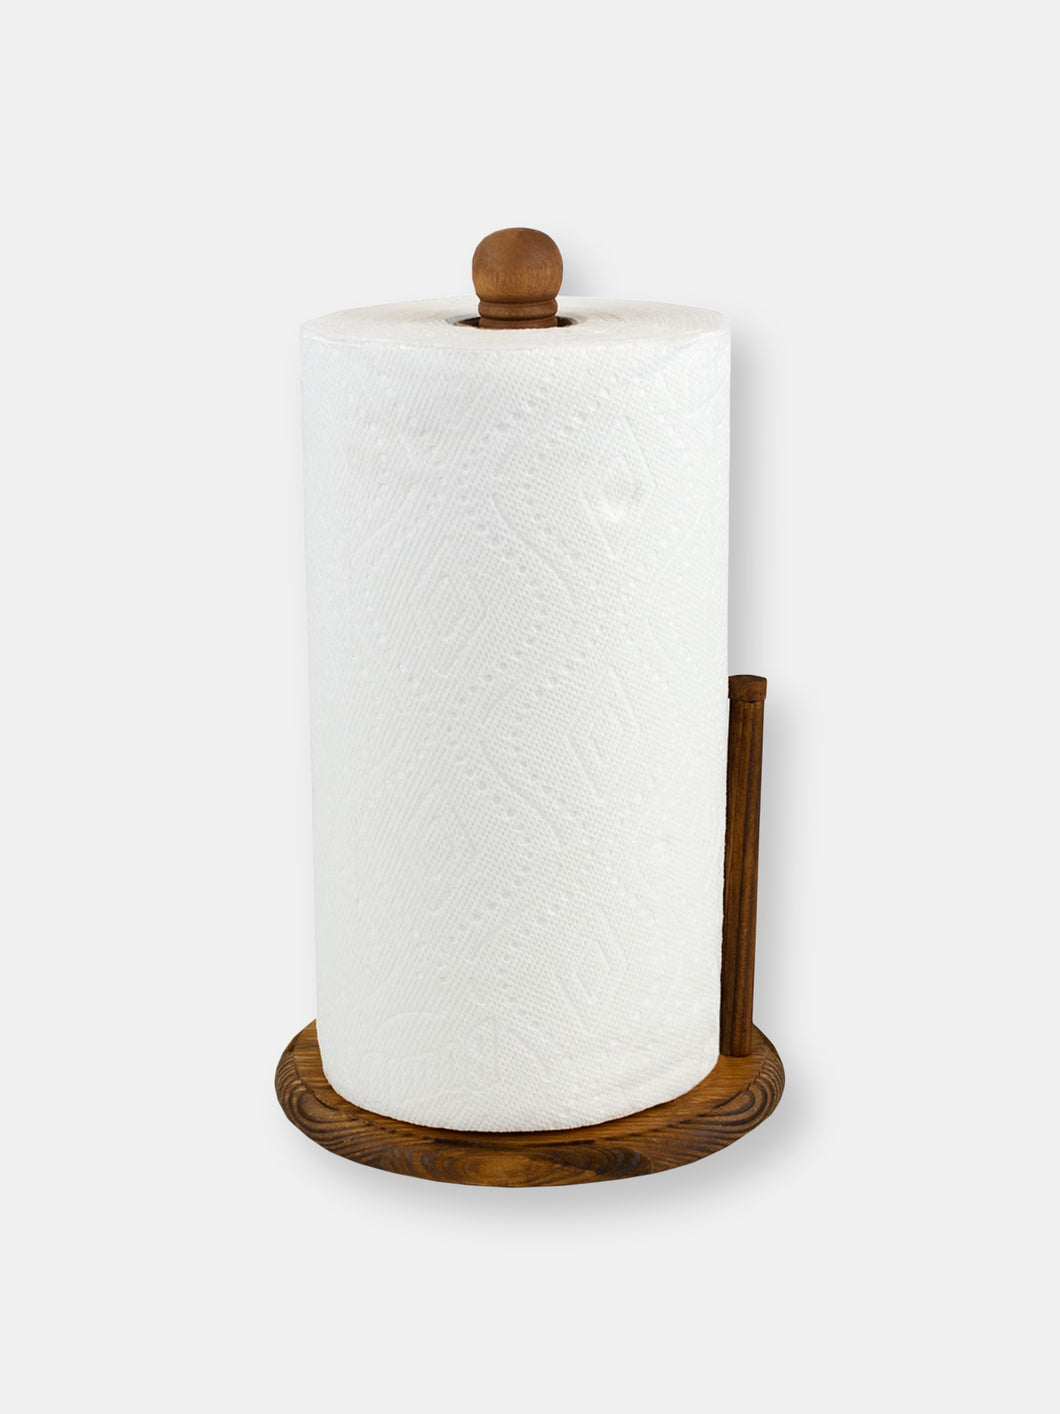 Rustic Collection Paper Towel Holder with Easy-Tear Arm